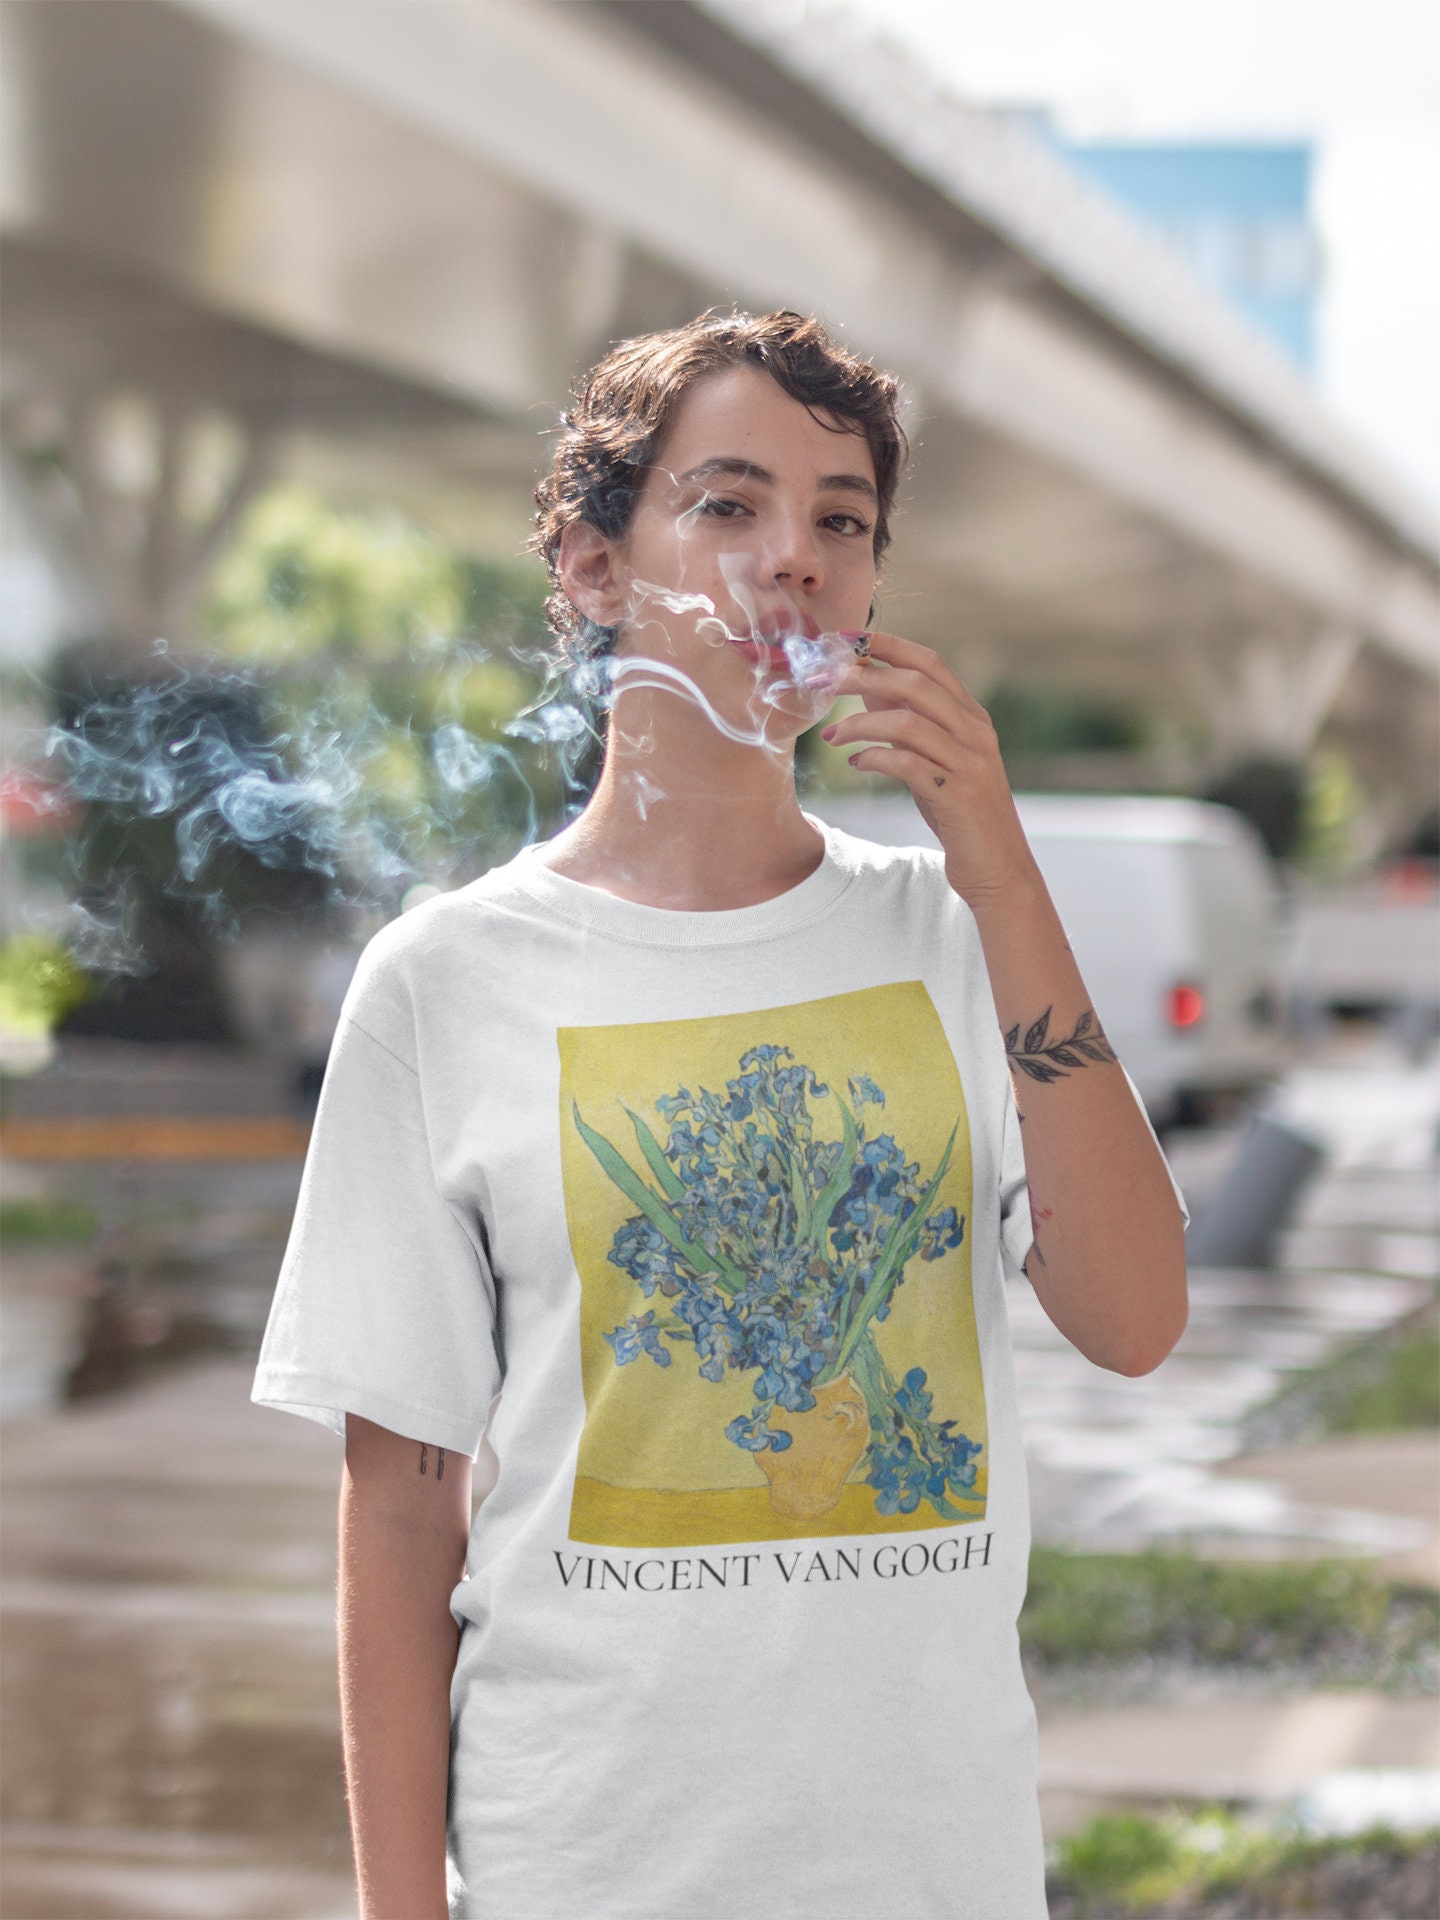  Weirdcore Sunflower Eye Dreamcore Aesthetic Long Sleeve T-Shirt  : Clothing, Shoes & Jewelry